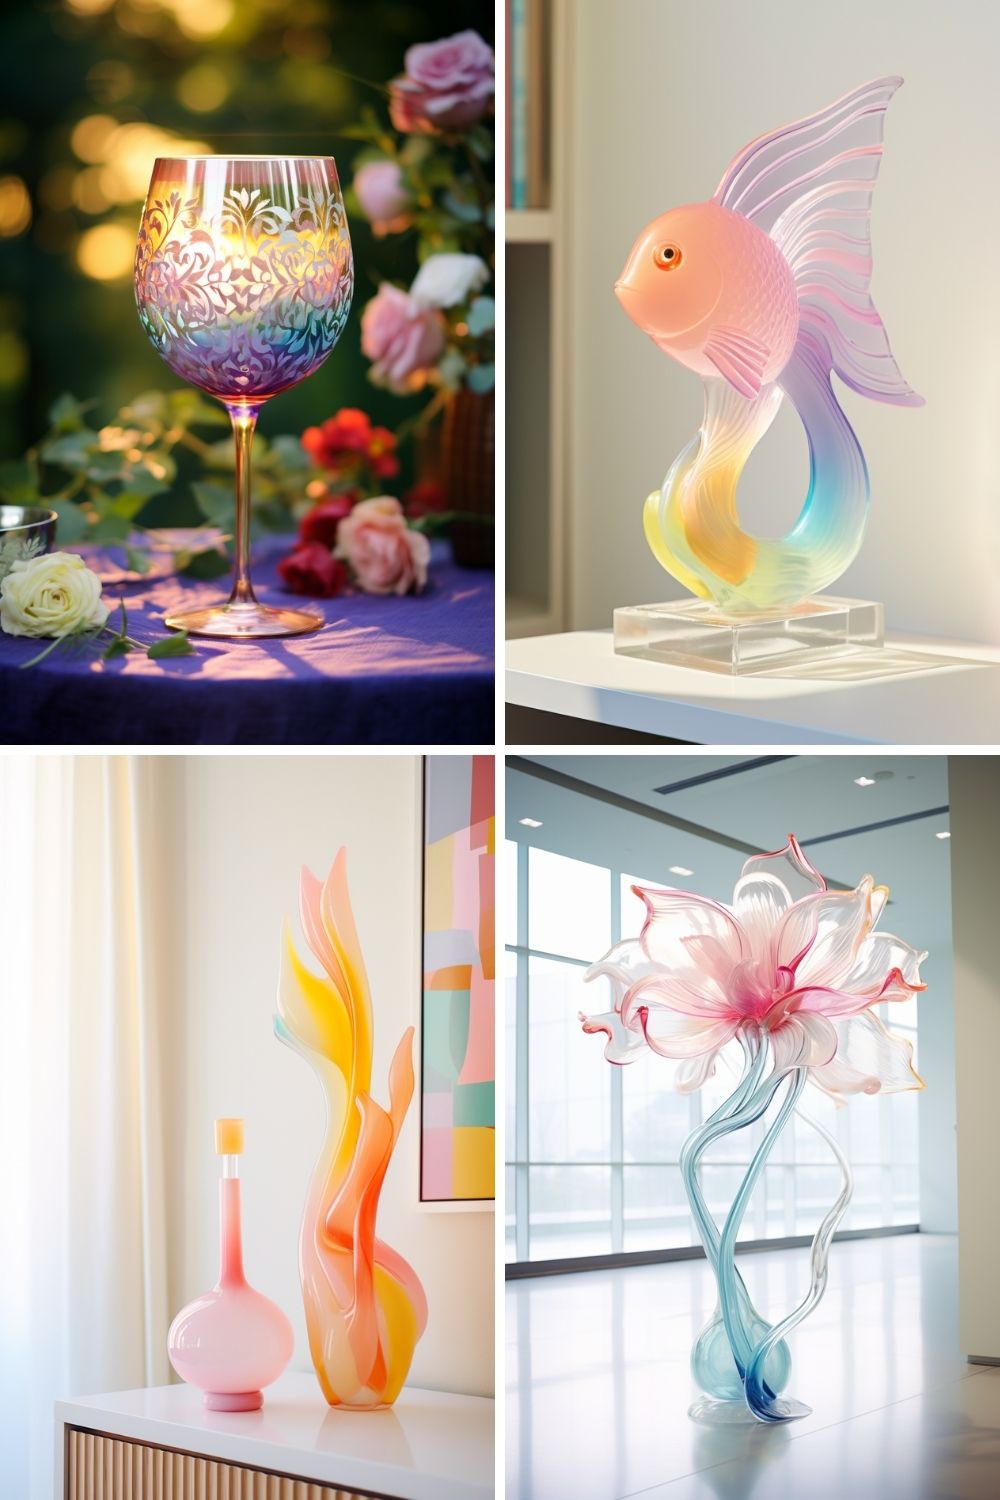 GLASS ART - Best Creative Unique Midjourney Prompt Ideas To Spark Your Creativity - Sprinkle of AI Image Prompt Set 24